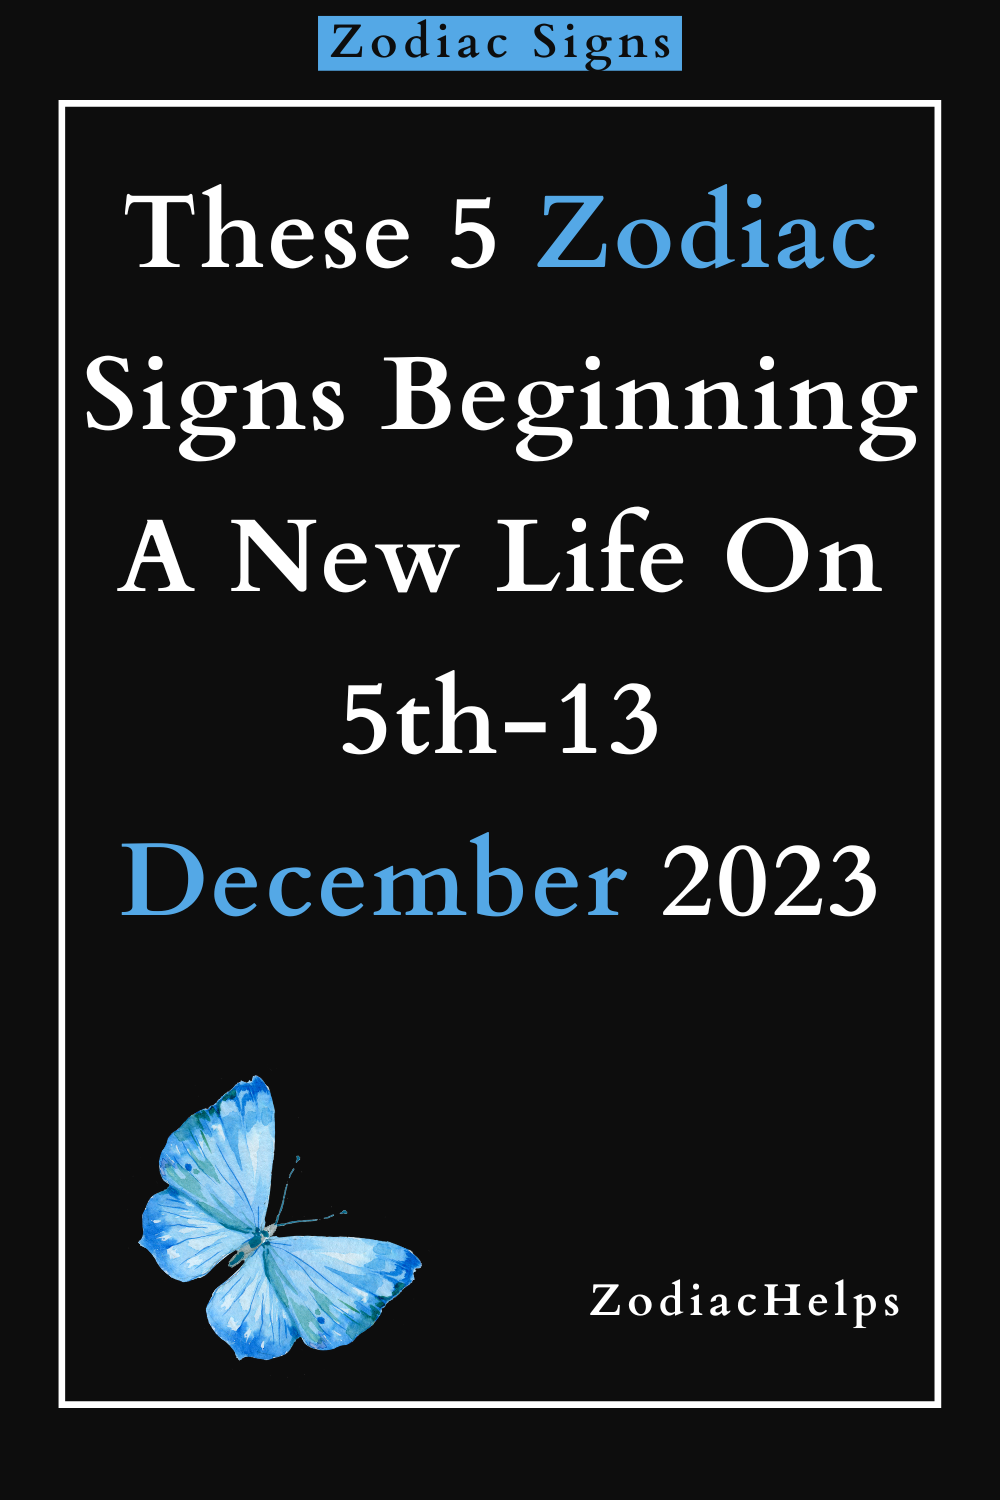 These 5 Zodiac Signs Beginning A New Life On 5th-13 December 2023